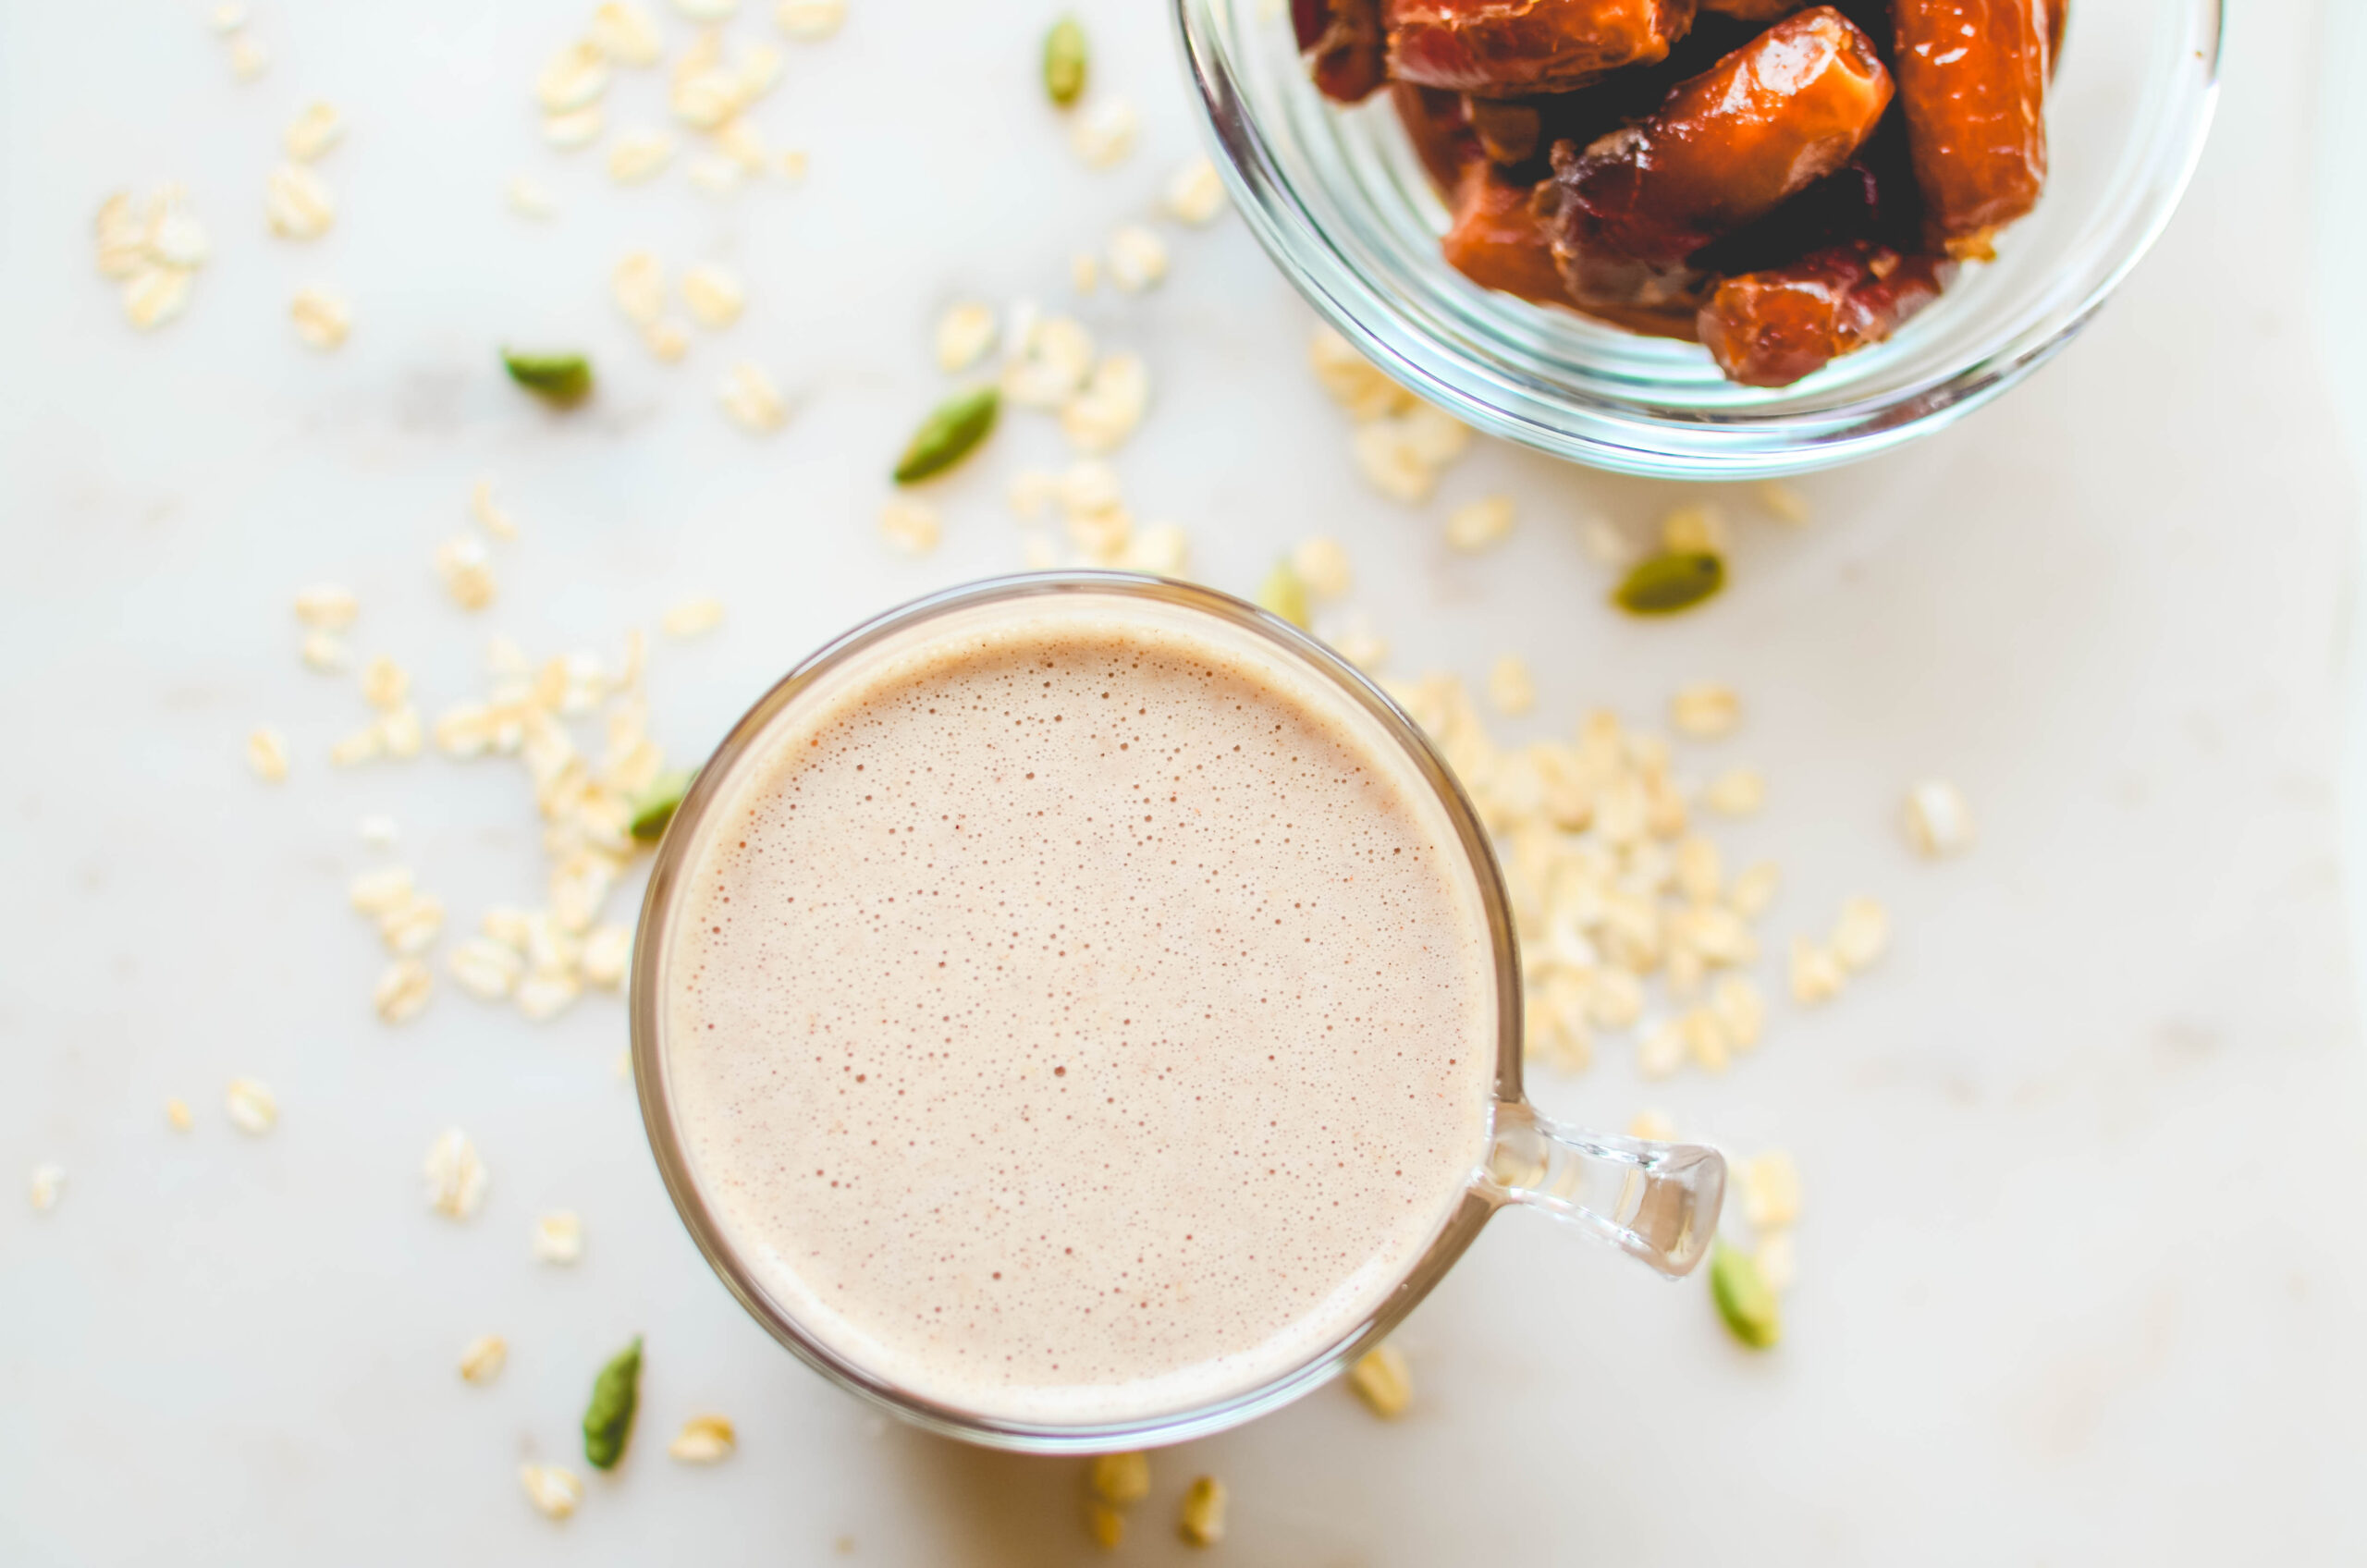 Cardamom Date Oat Smoothie